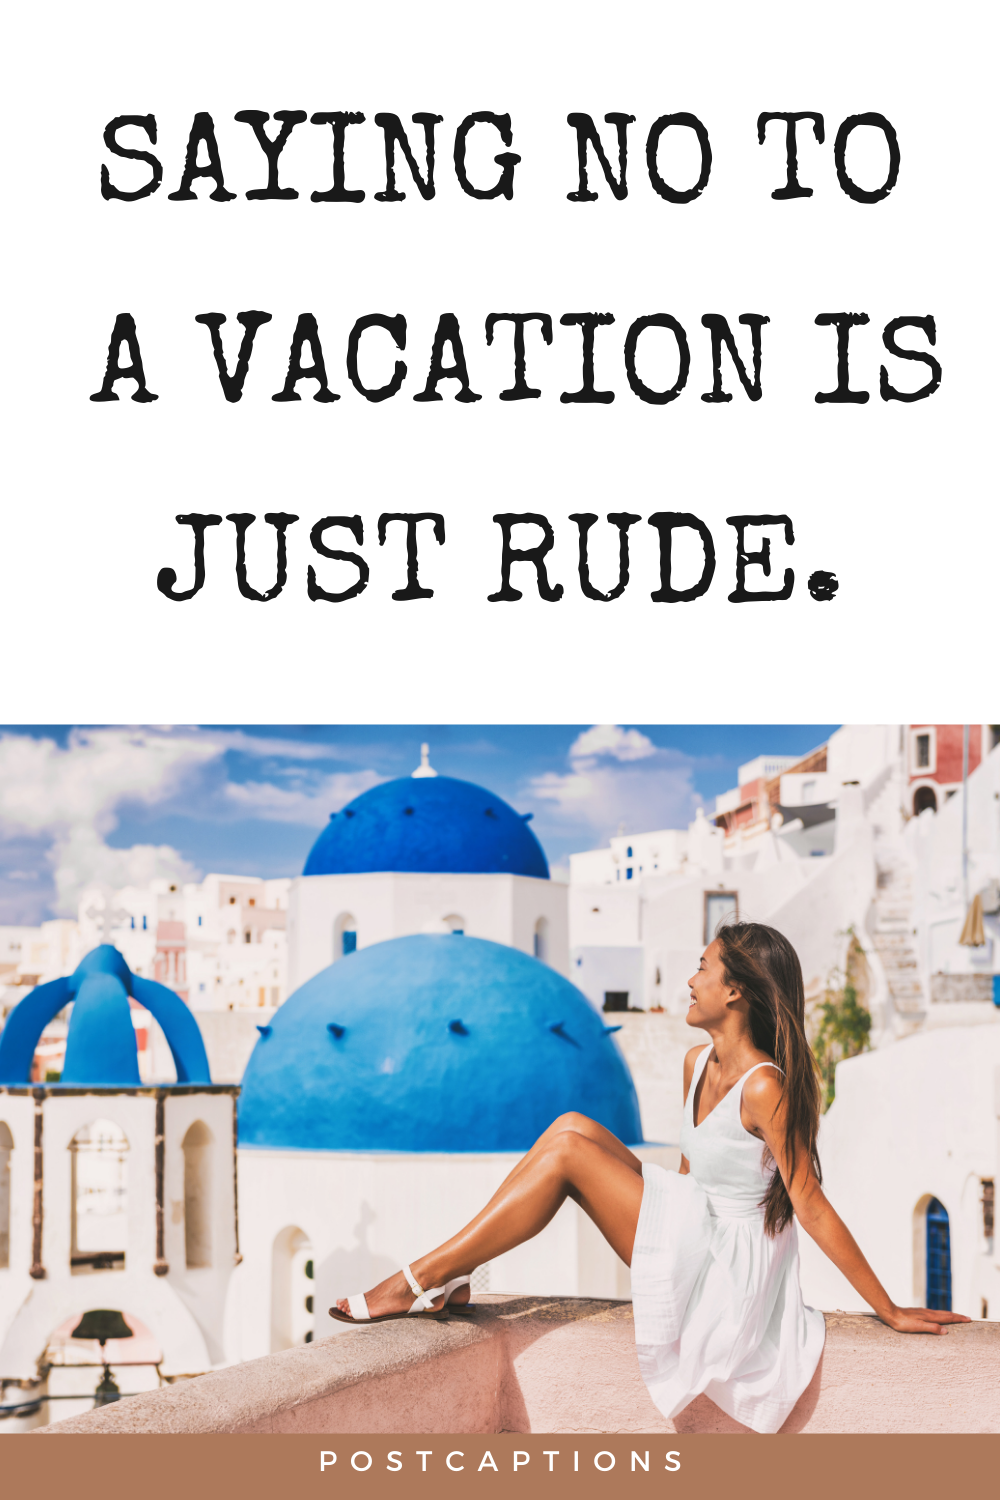 150 Perfect Vacation Captions for Instagram 